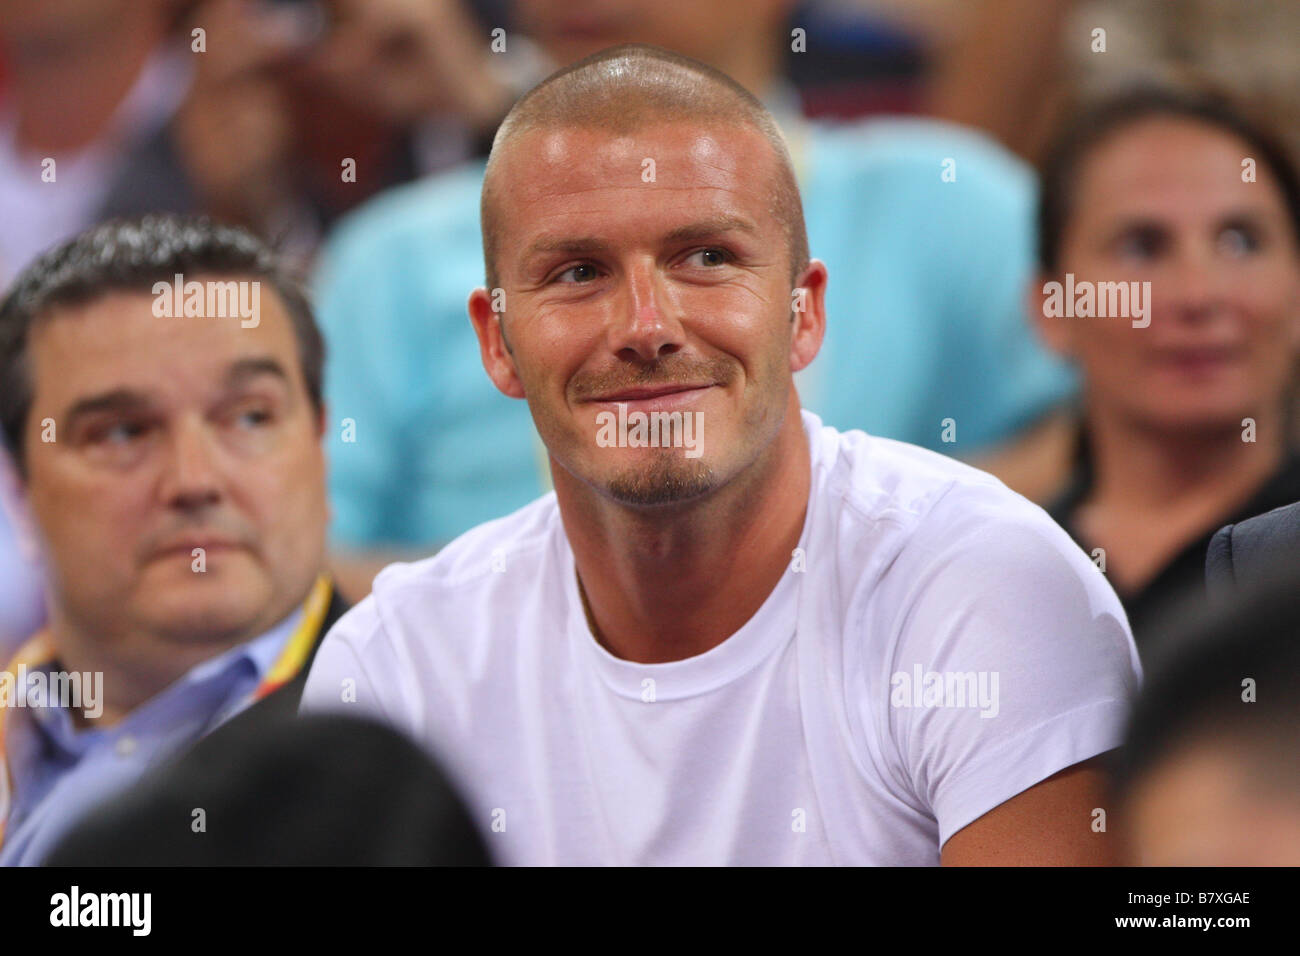 David Beckham AUGUST 24 2008 Basketball Beijing 2008 Olympic Games David Beckham watches the Mens Basketball Final match between United States and Spain at the Beijing Olympic Basketball Gymnasium in Beijing China Photo by Daiju Kitamura AFLO SPORT 1045 Stock Photo